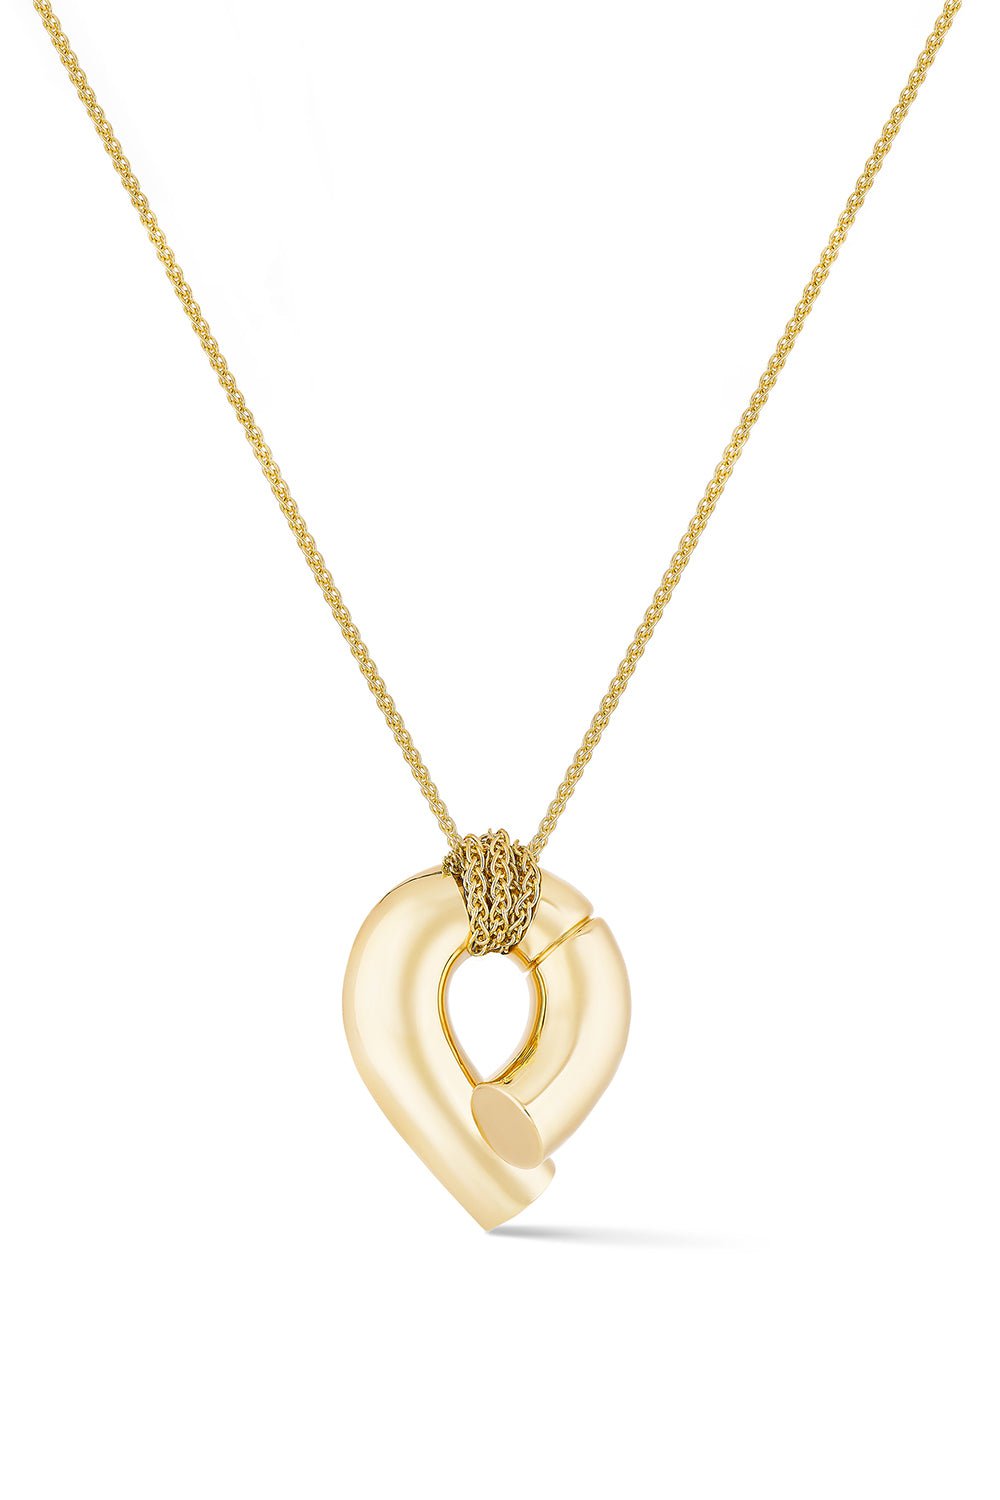 TABAYER-Oera Gold Pendant Necklace-YELLOW GOLD